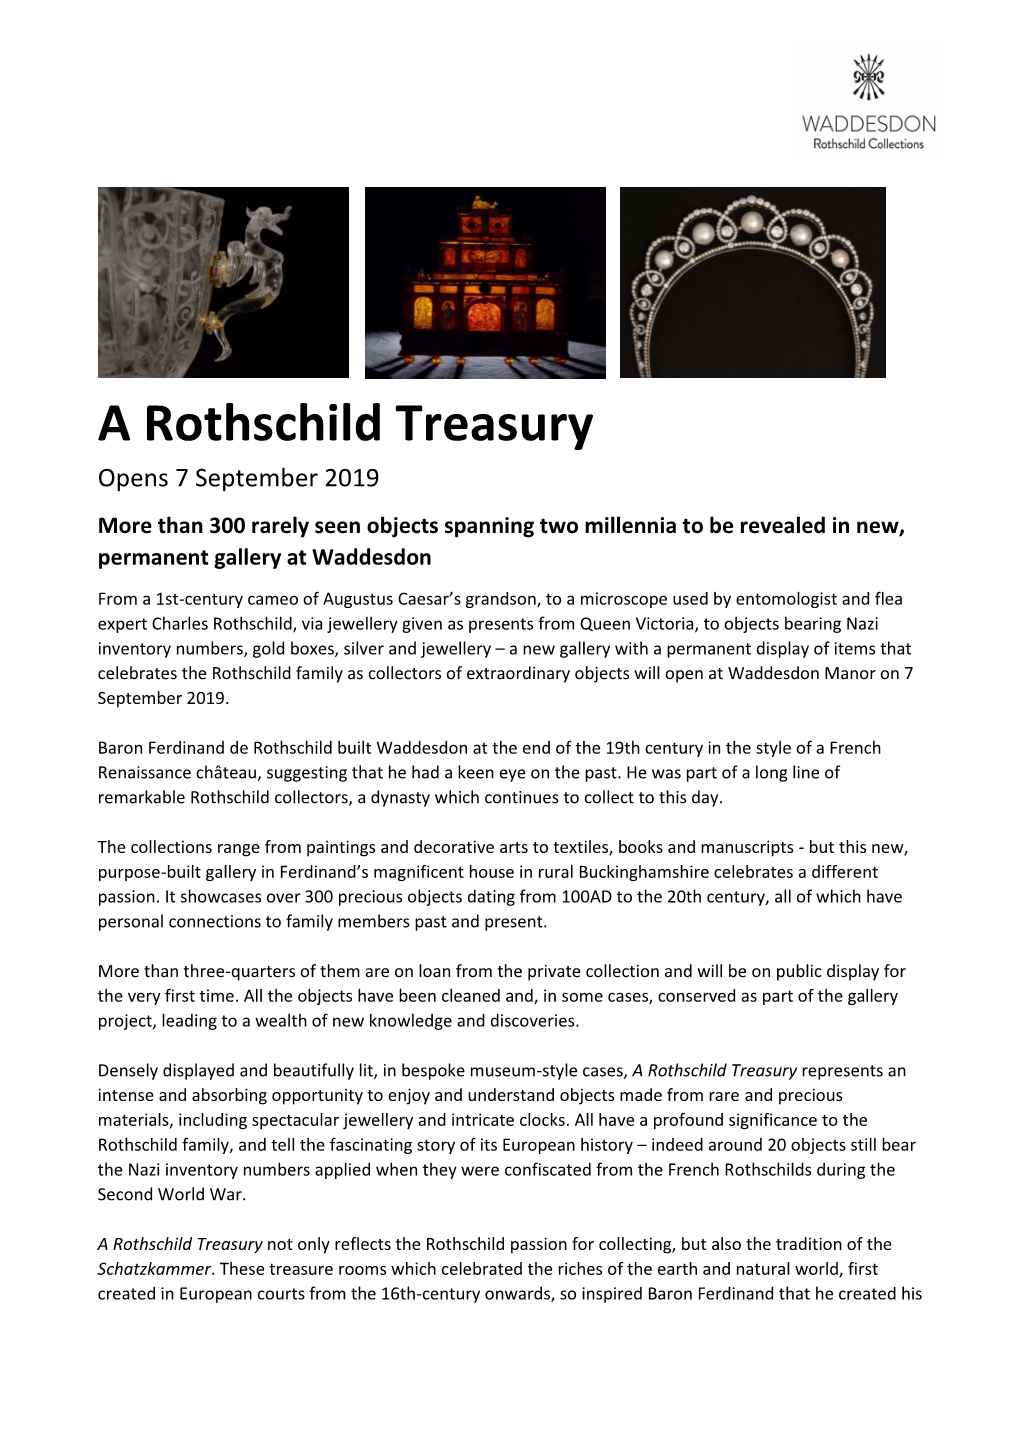 A Rothschild Treasury Opens 7 September 2019 More Than 300 Rarely Seen Objects Spanning Two Millennia to Be Revealed in New, Permanent Gallery at Waddesdon